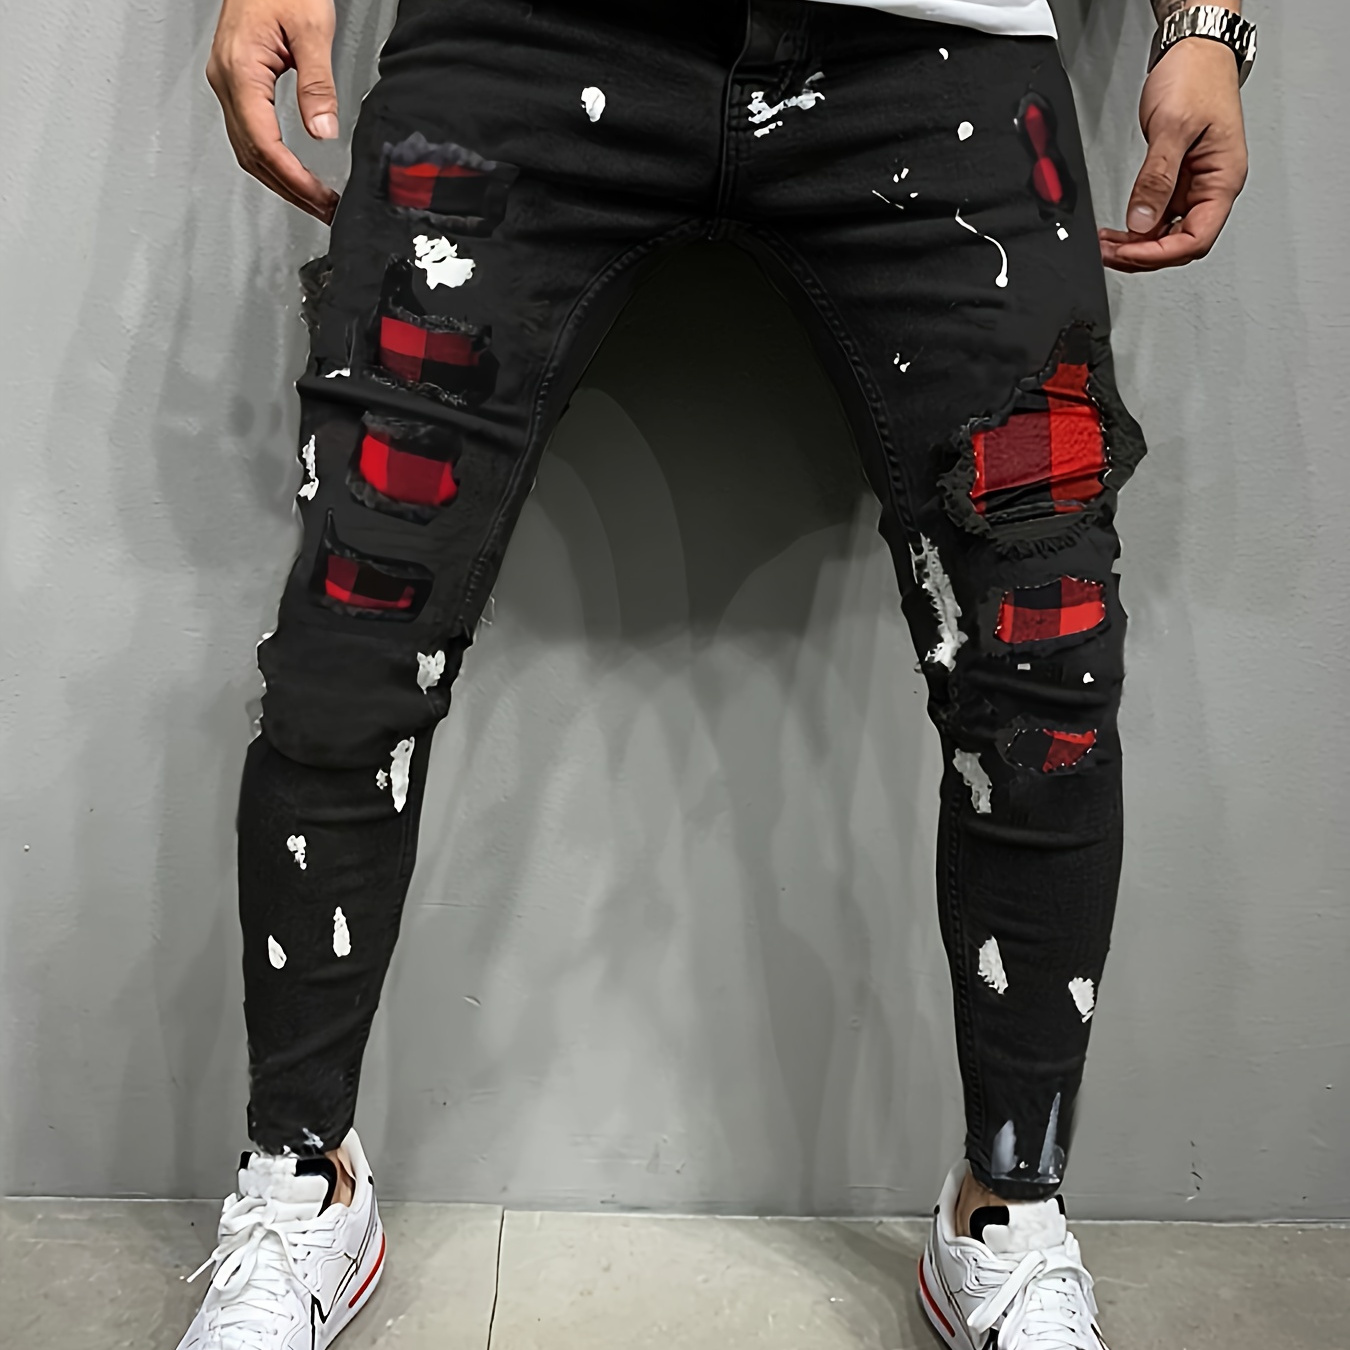 

Men's Skinny Ripped Jeans With Paint Splatter Design, Casual Distressed Slim Fit Denim Pants, Street Style